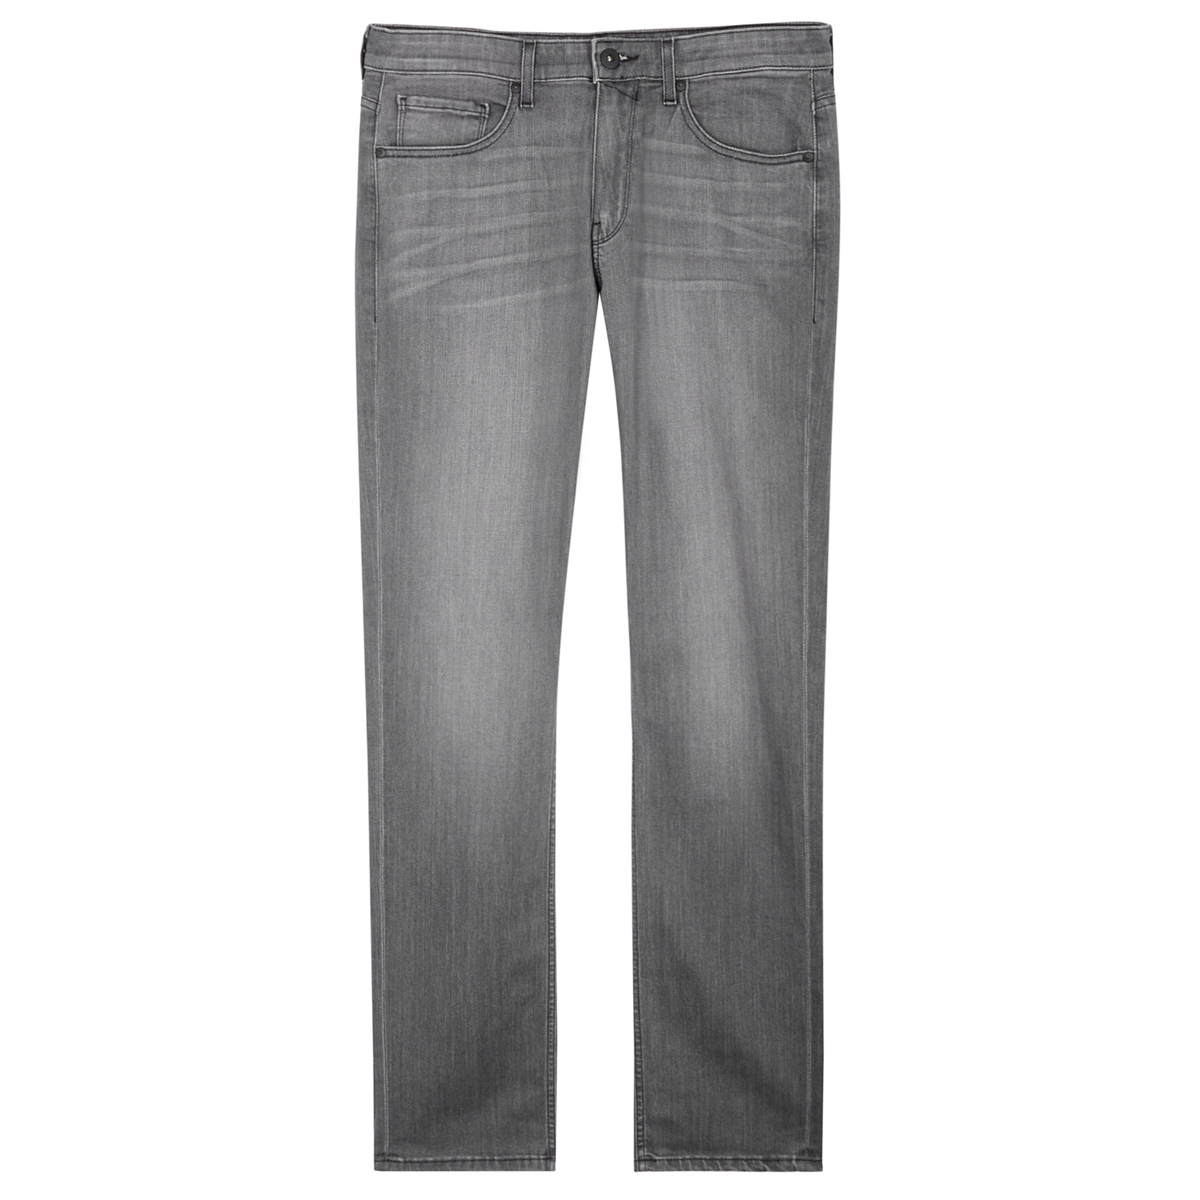 Paige Federal Grey Jeans